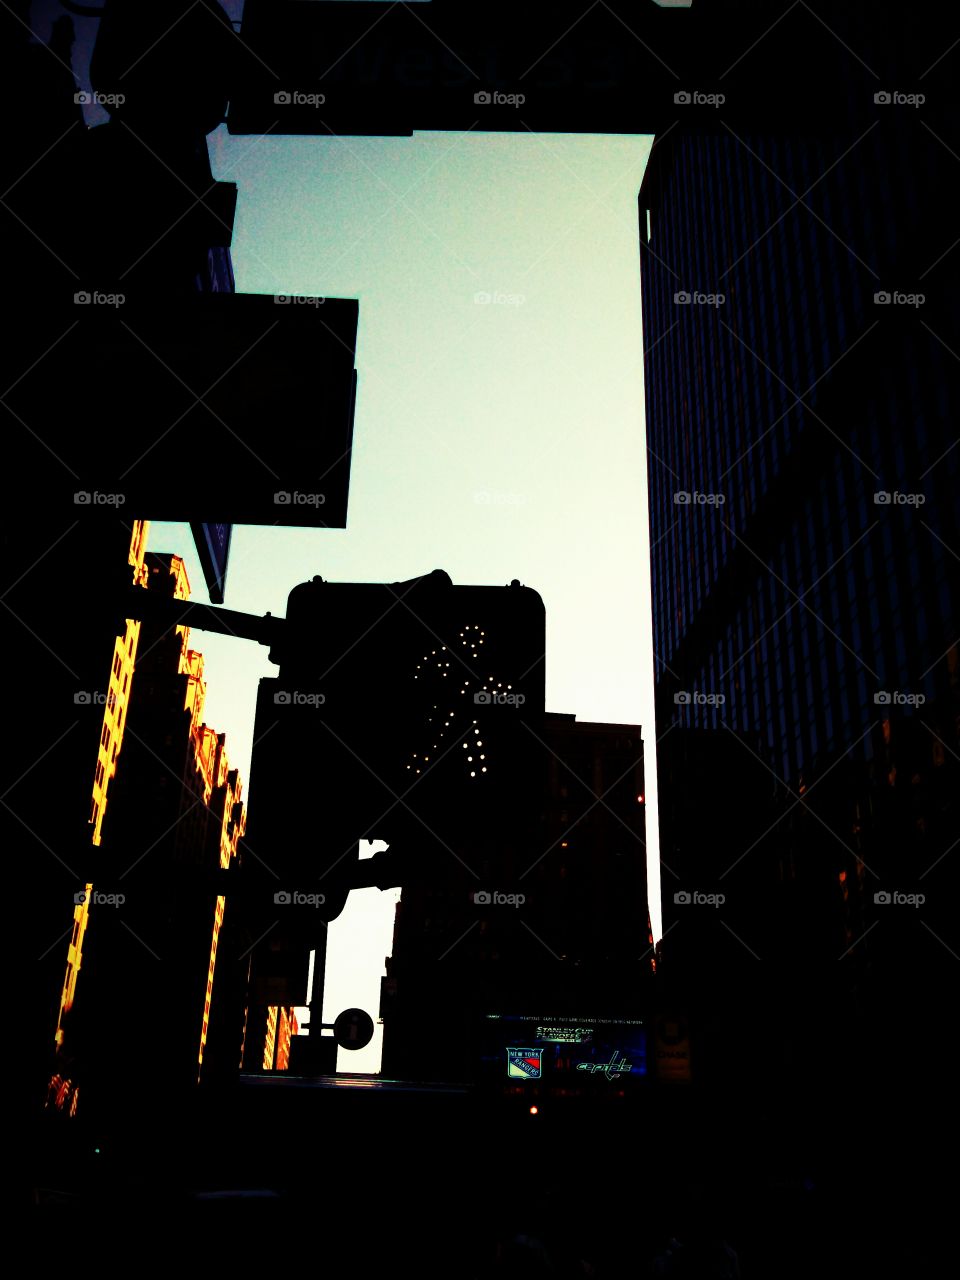 NYC silhouette